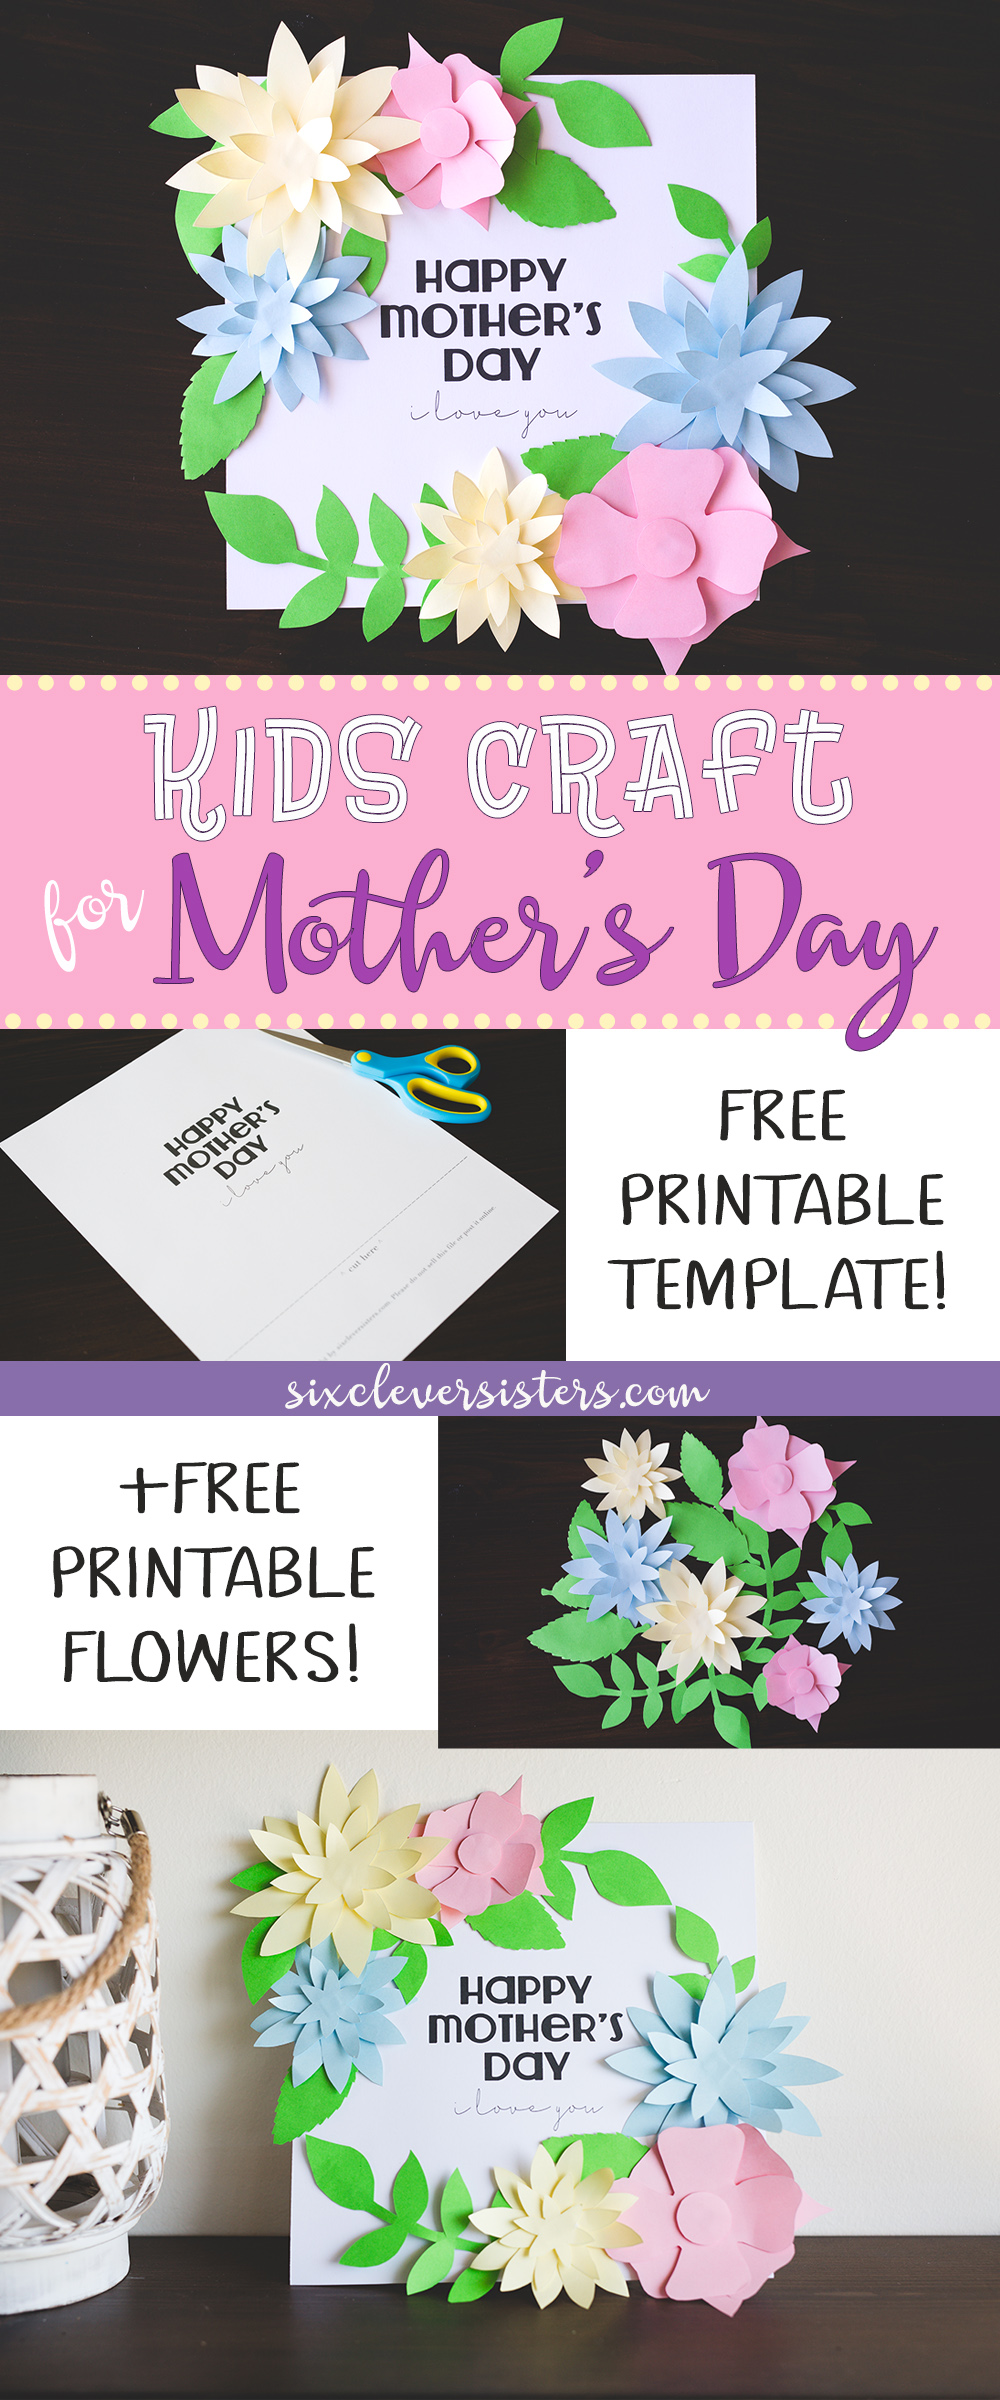 mother-s-day-crafts-for-kids-free-printable-templates-six-clever-sisters